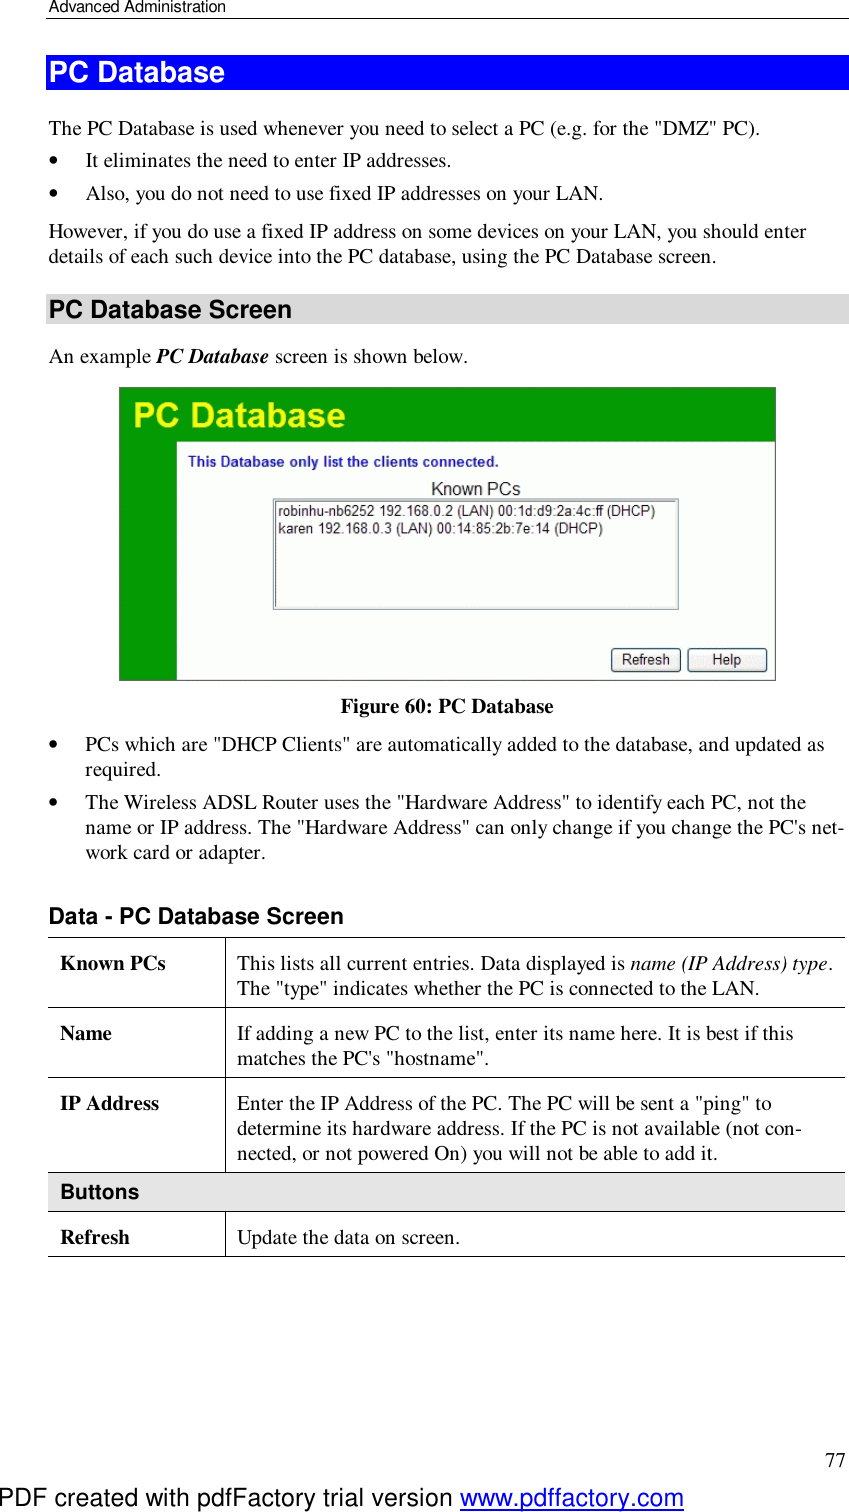 Advanced Administration 77 PC Database The PC Database is used whenever you need to select a PC (e.g. for the &quot;DMZ&quot; PC).  •  It eliminates the need to enter IP addresses.  •  Also, you do not need to use fixed IP addresses on your LAN. However, if you do use a fixed IP address on some devices on your LAN, you should enter details of each such device into the PC database, using the PC Database screen. PC Database Screen An example PC Database screen is shown below.  Figure 60: PC Database  •  PCs which are &quot;DHCP Clients&quot; are automatically added to the database, and updated as required. •  The Wireless ADSL Router uses the &quot;Hardware Address&quot; to identify each PC, not the name or IP address. The &quot;Hardware Address&quot; can only change if you change the PC&apos;s net-work card or adapter.  Data - PC Database Screen Known PCs  This lists all current entries. Data displayed is name (IP Address) type. The &quot;type&quot; indicates whether the PC is connected to the LAN. Name  If adding a new PC to the list, enter its name here. It is best if this matches the PC&apos;s &quot;hostname&quot;. IP Address  Enter the IP Address of the PC. The PC will be sent a &quot;ping&quot; to determine its hardware address. If the PC is not available (not con-nected, or not powered On) you will not be able to add it. Buttons Refresh  Update the data on screen.  PDF created with pdfFactory trial version www.pdffactory.com